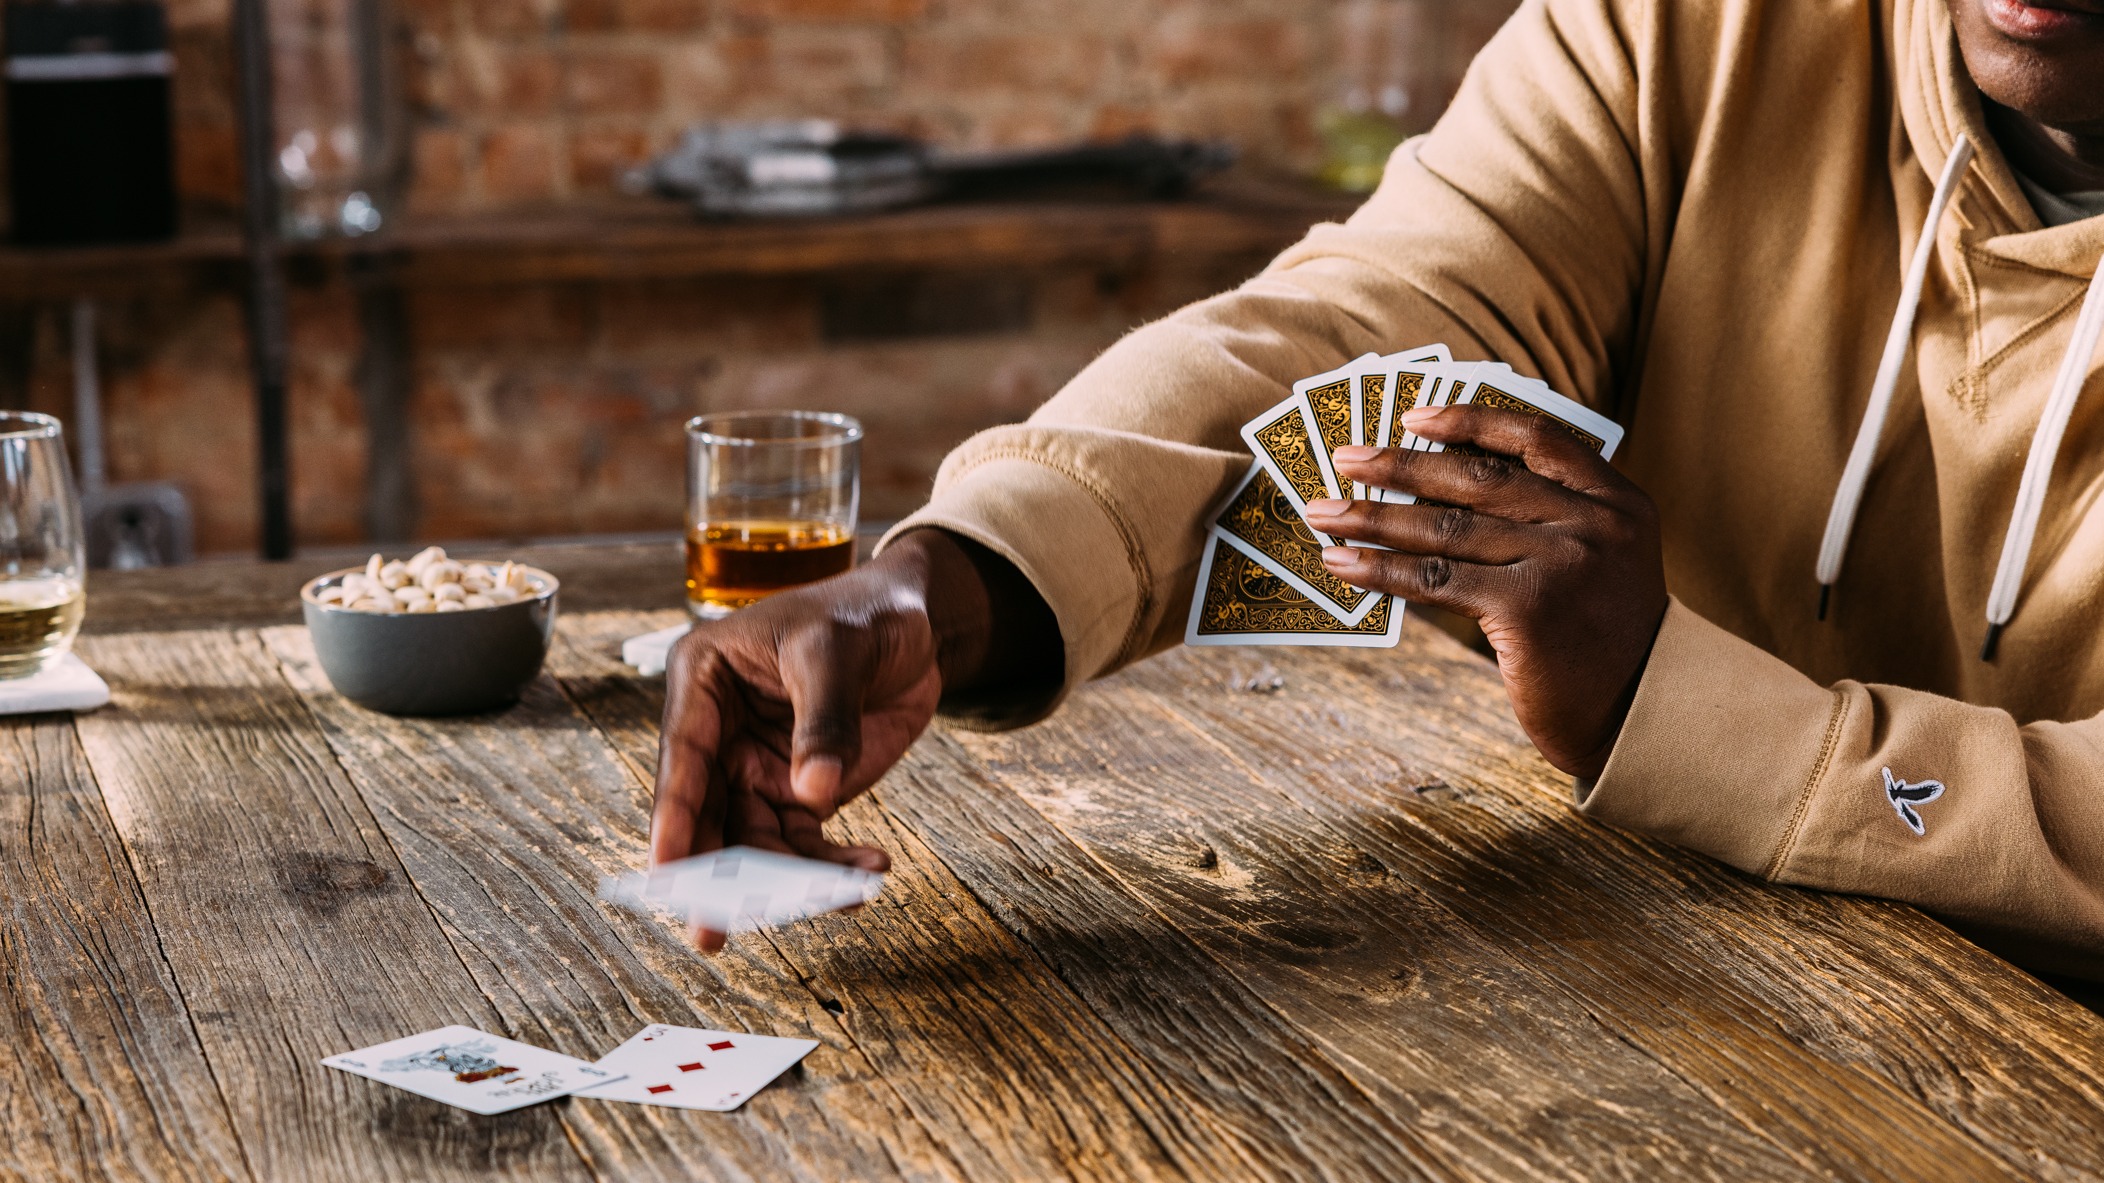 Person throwing down card into play pile on wooden table, with drinks and snacks around.